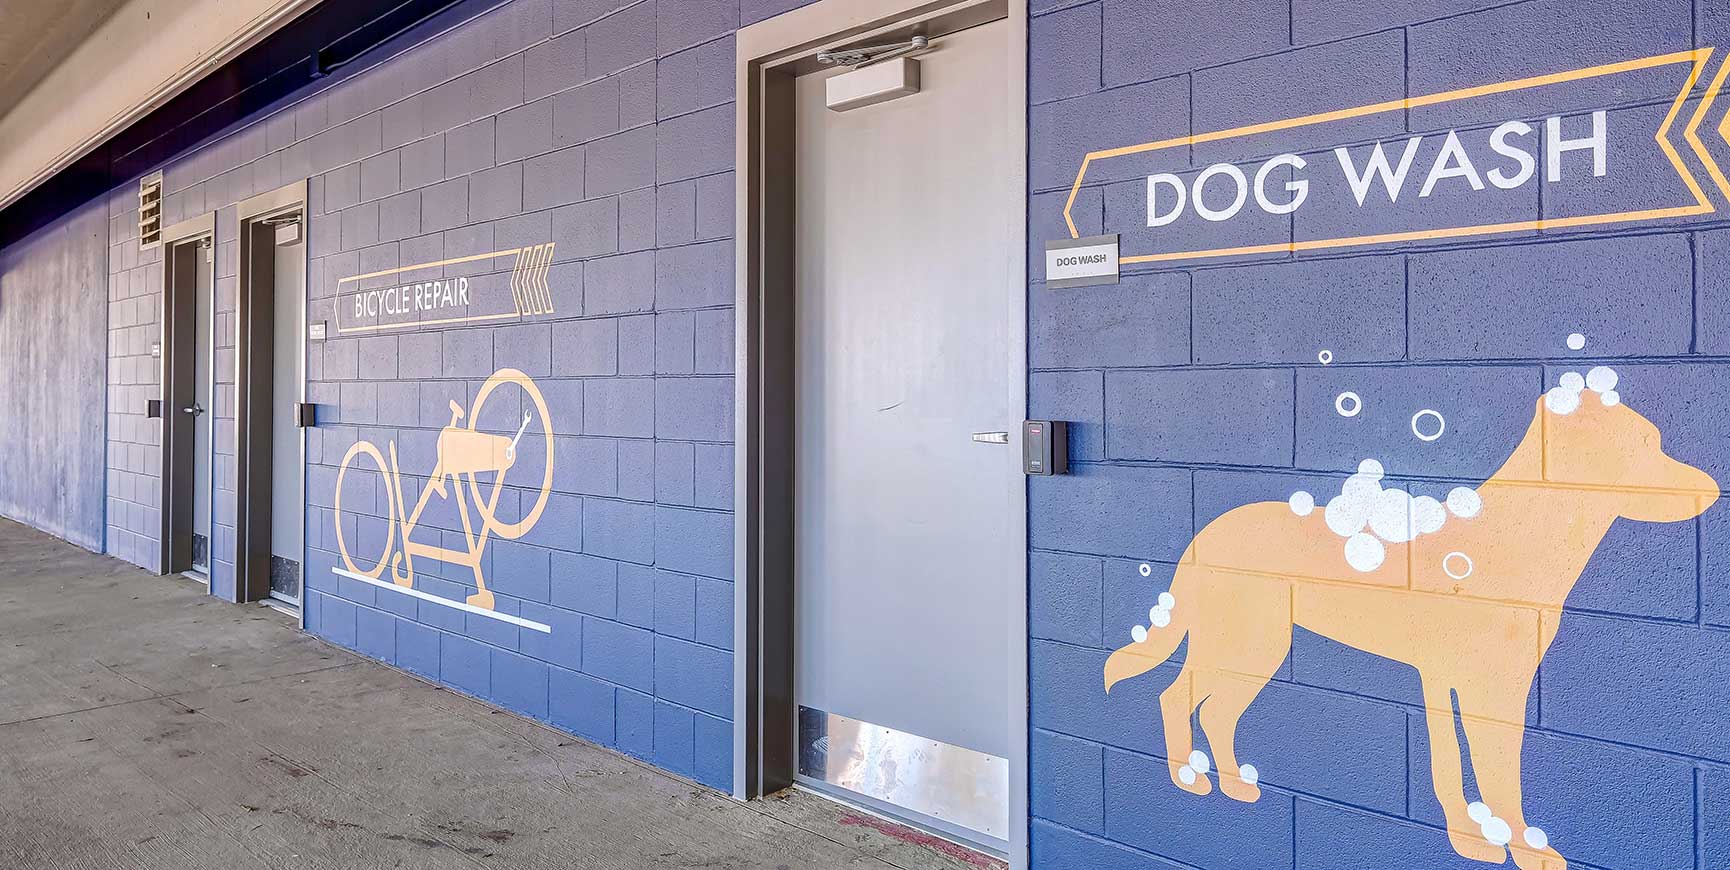 Dog spa and bicycle storage in parking garage